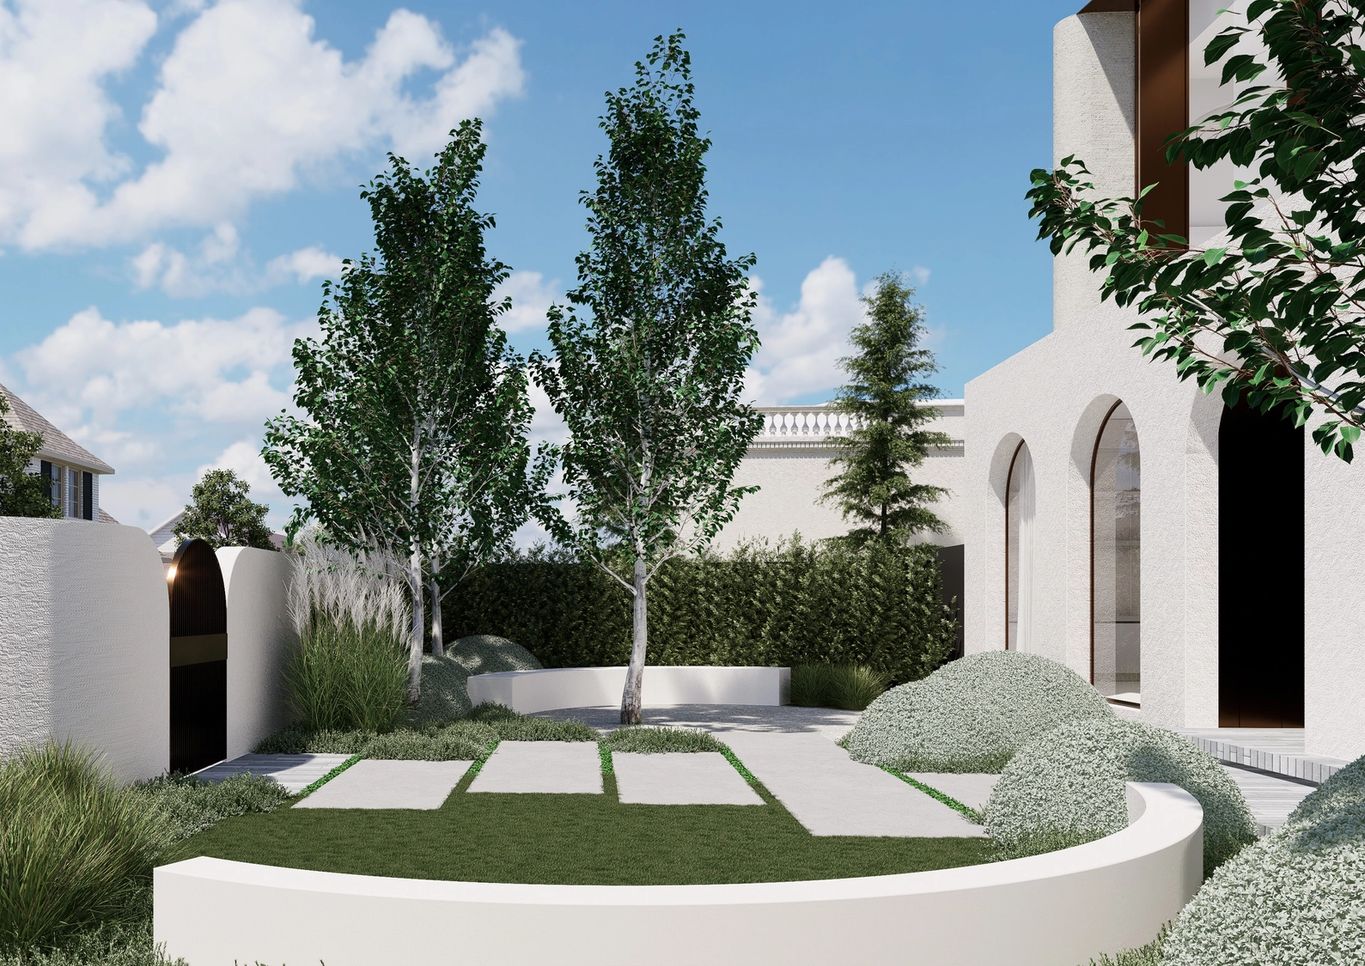 Front garden design with modern architecture including curves and unique planting scheme